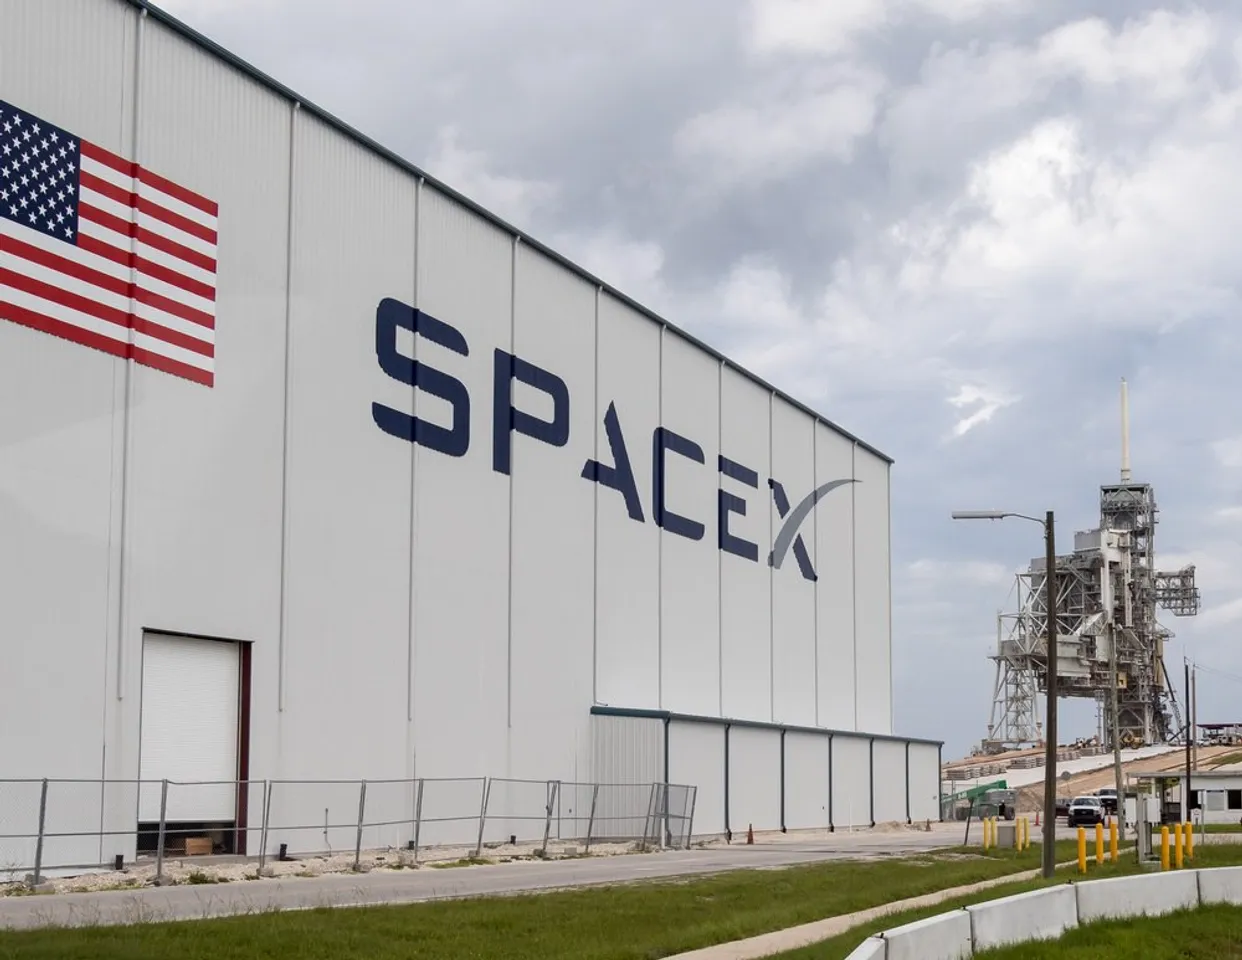 SpaceX kicks of 2018 by launching Zuma spacecraft for the US govt.